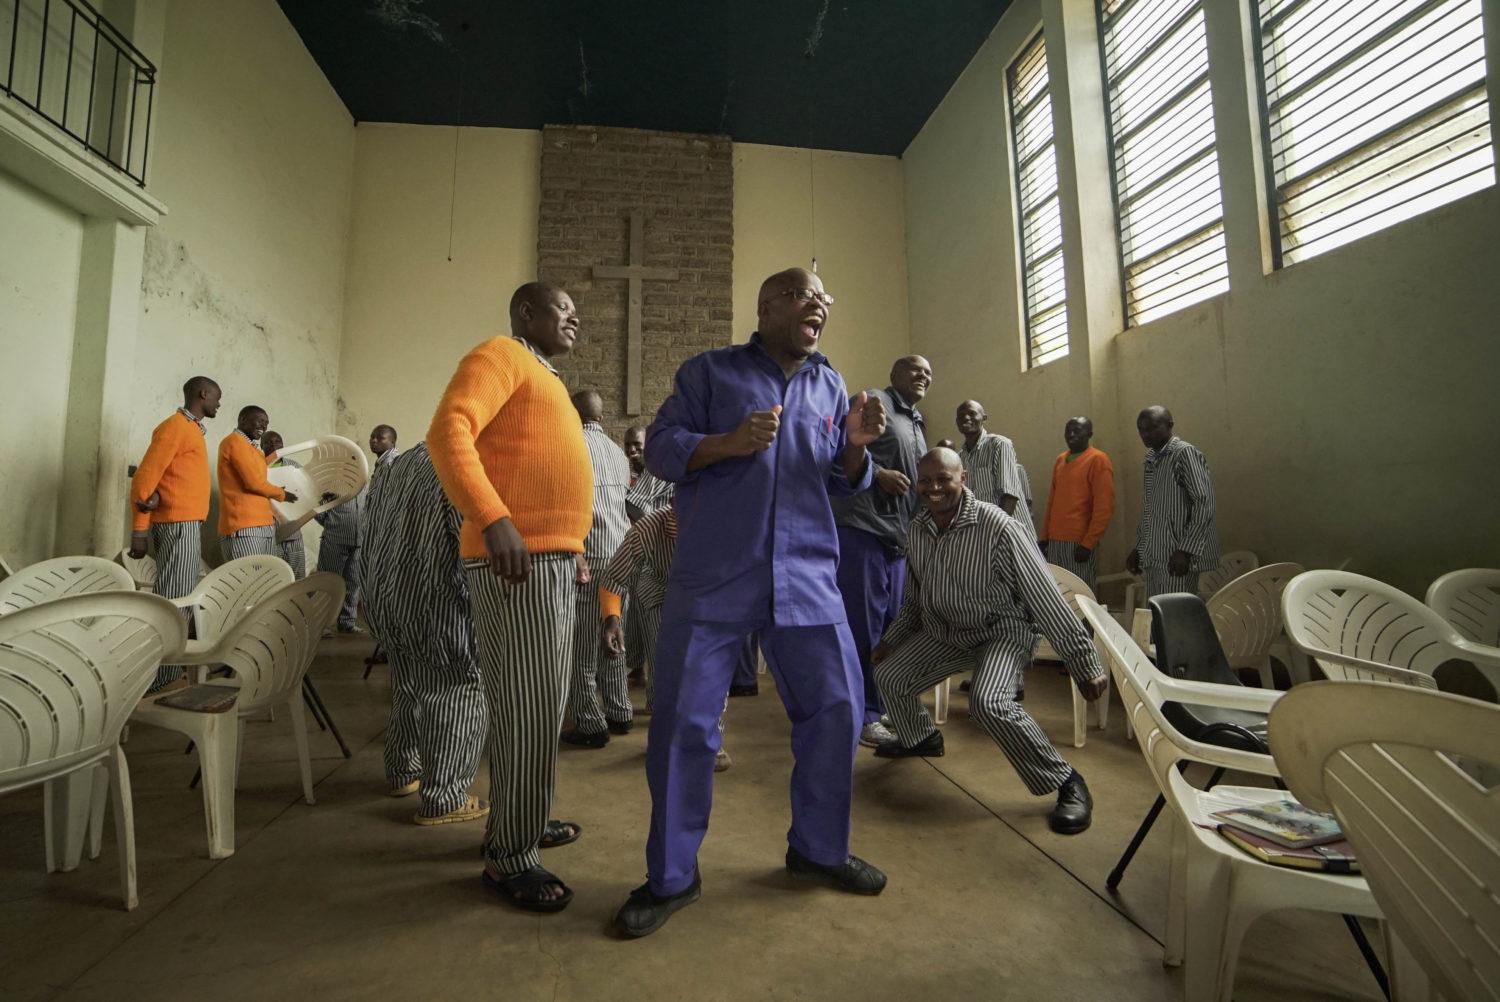 George dances with other inmates at the start of the Man Enough workshop.